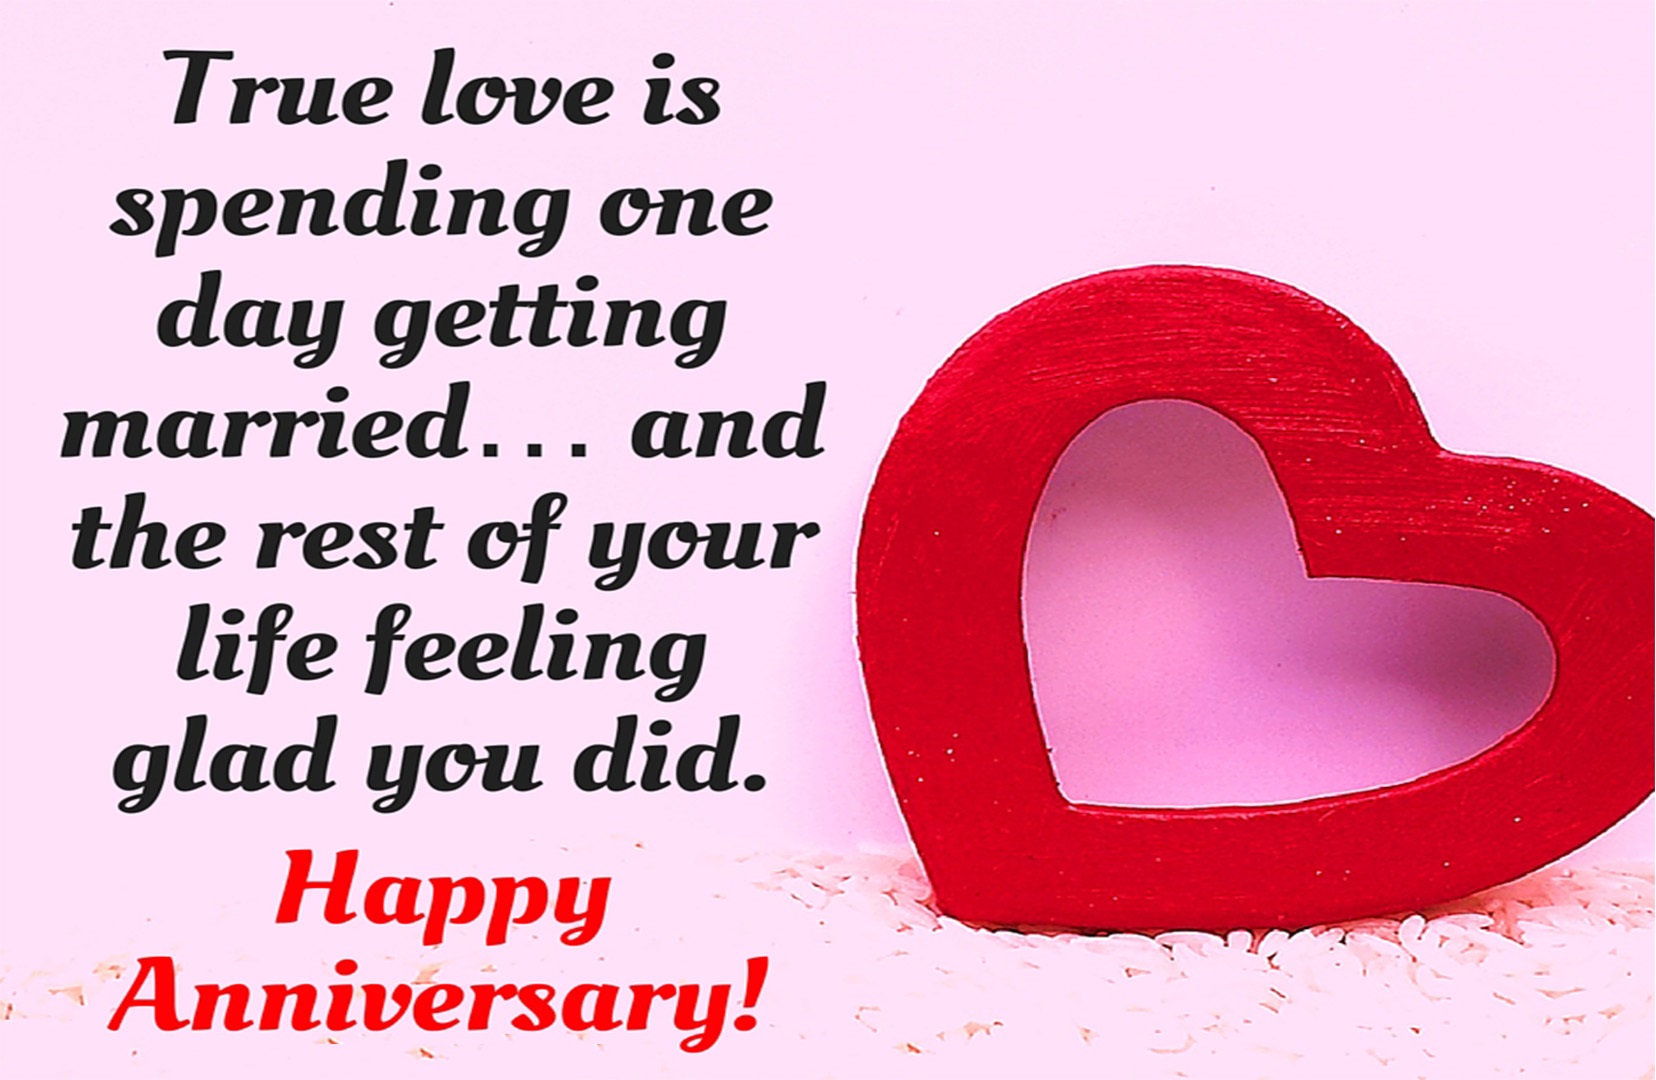 lovely wishes for marriage anniversary image